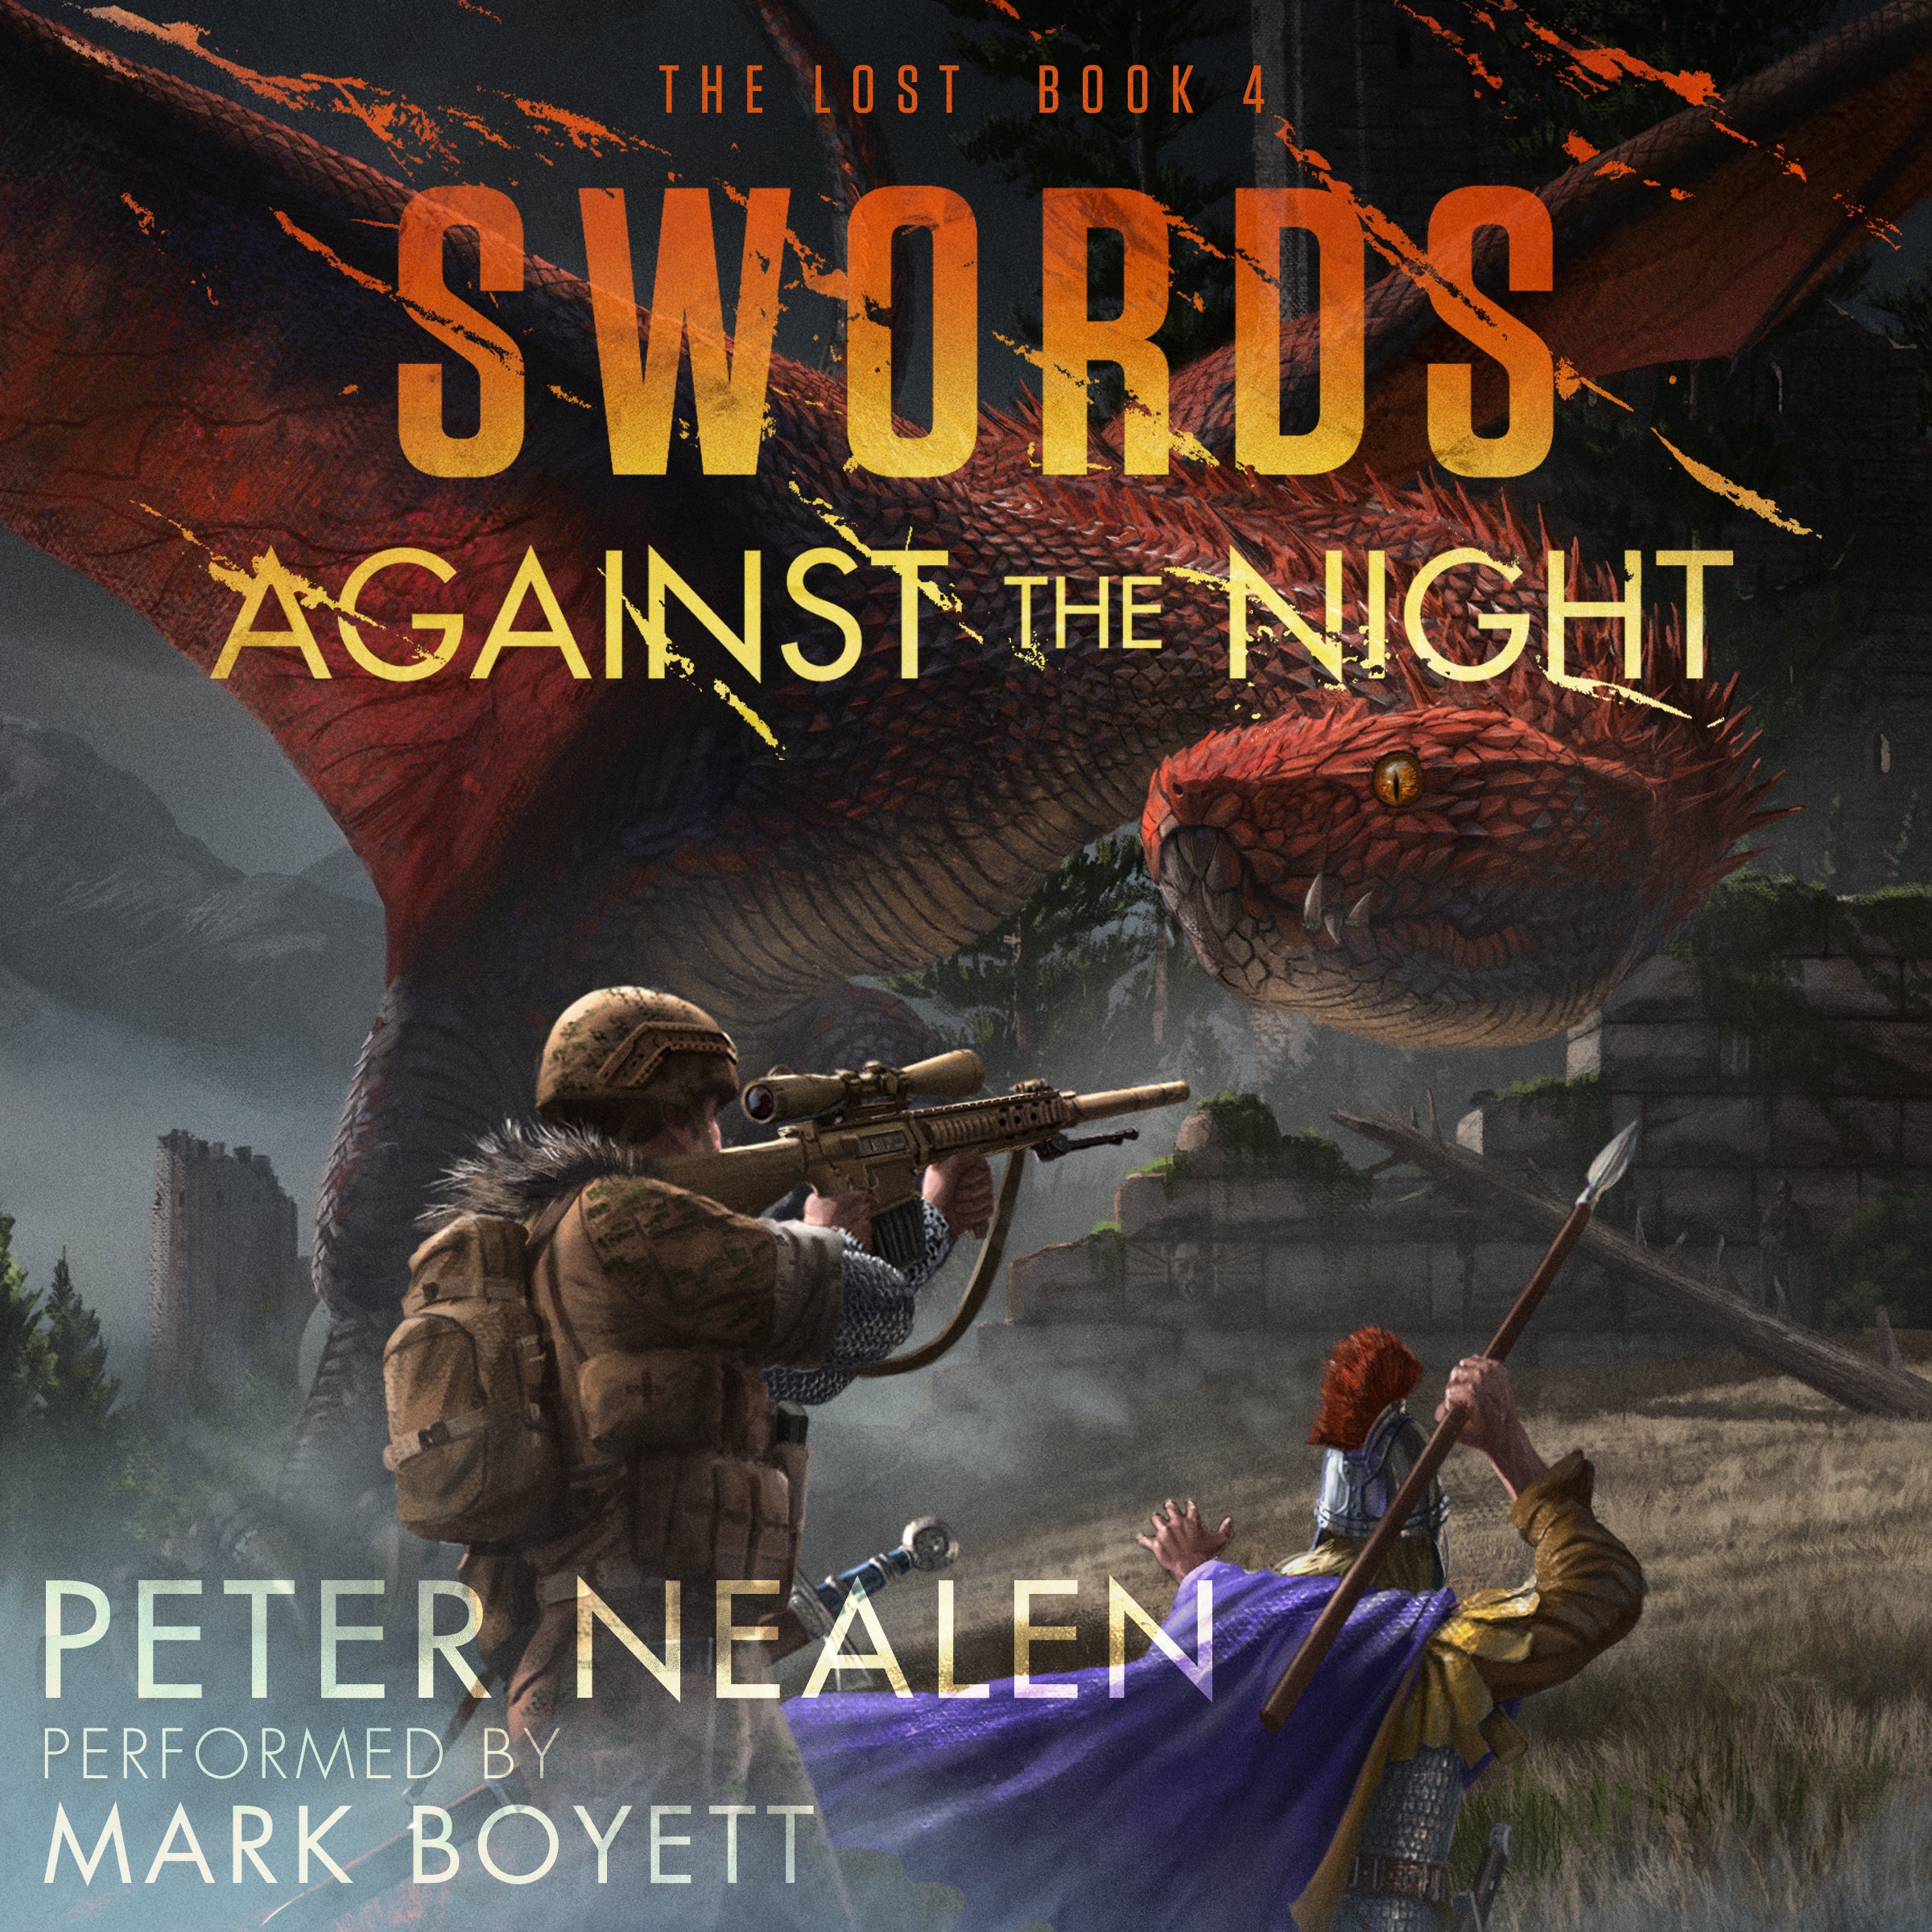 Swords Against the Night Audiobook (The Lost, Book 4)